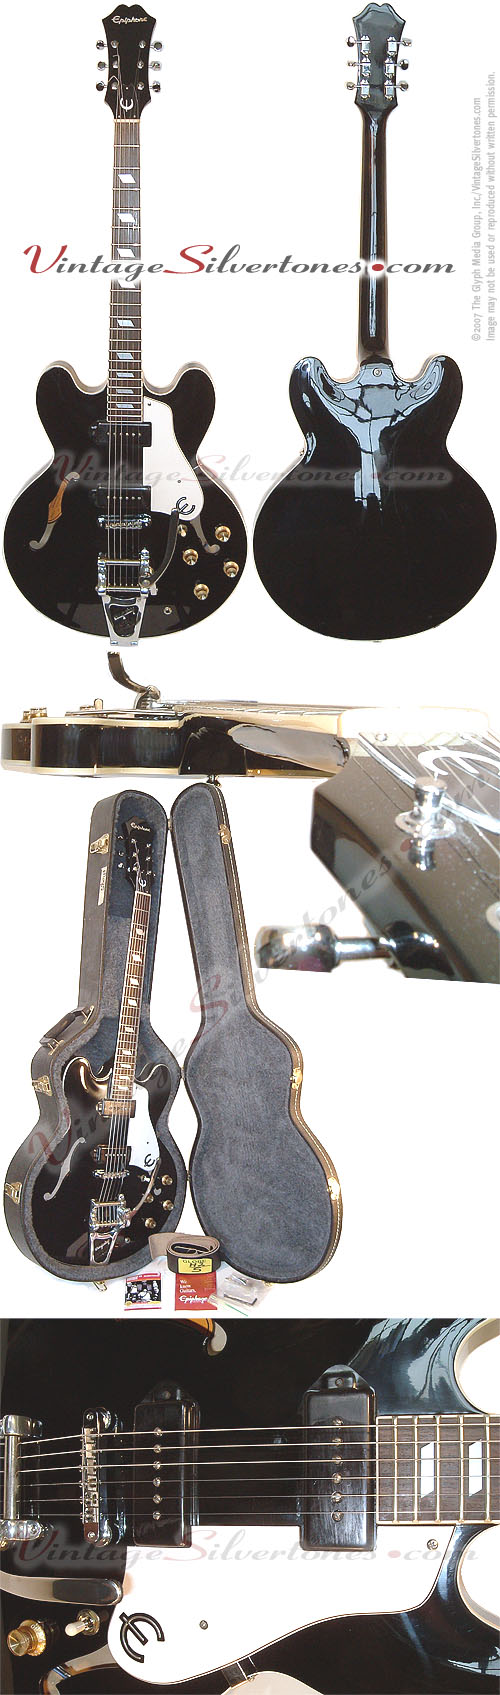 Epiphone Casino - Robert Quine's 1995 2 pickup (Duncan's) black semi-hollow body including a package of Robert Quine collectables